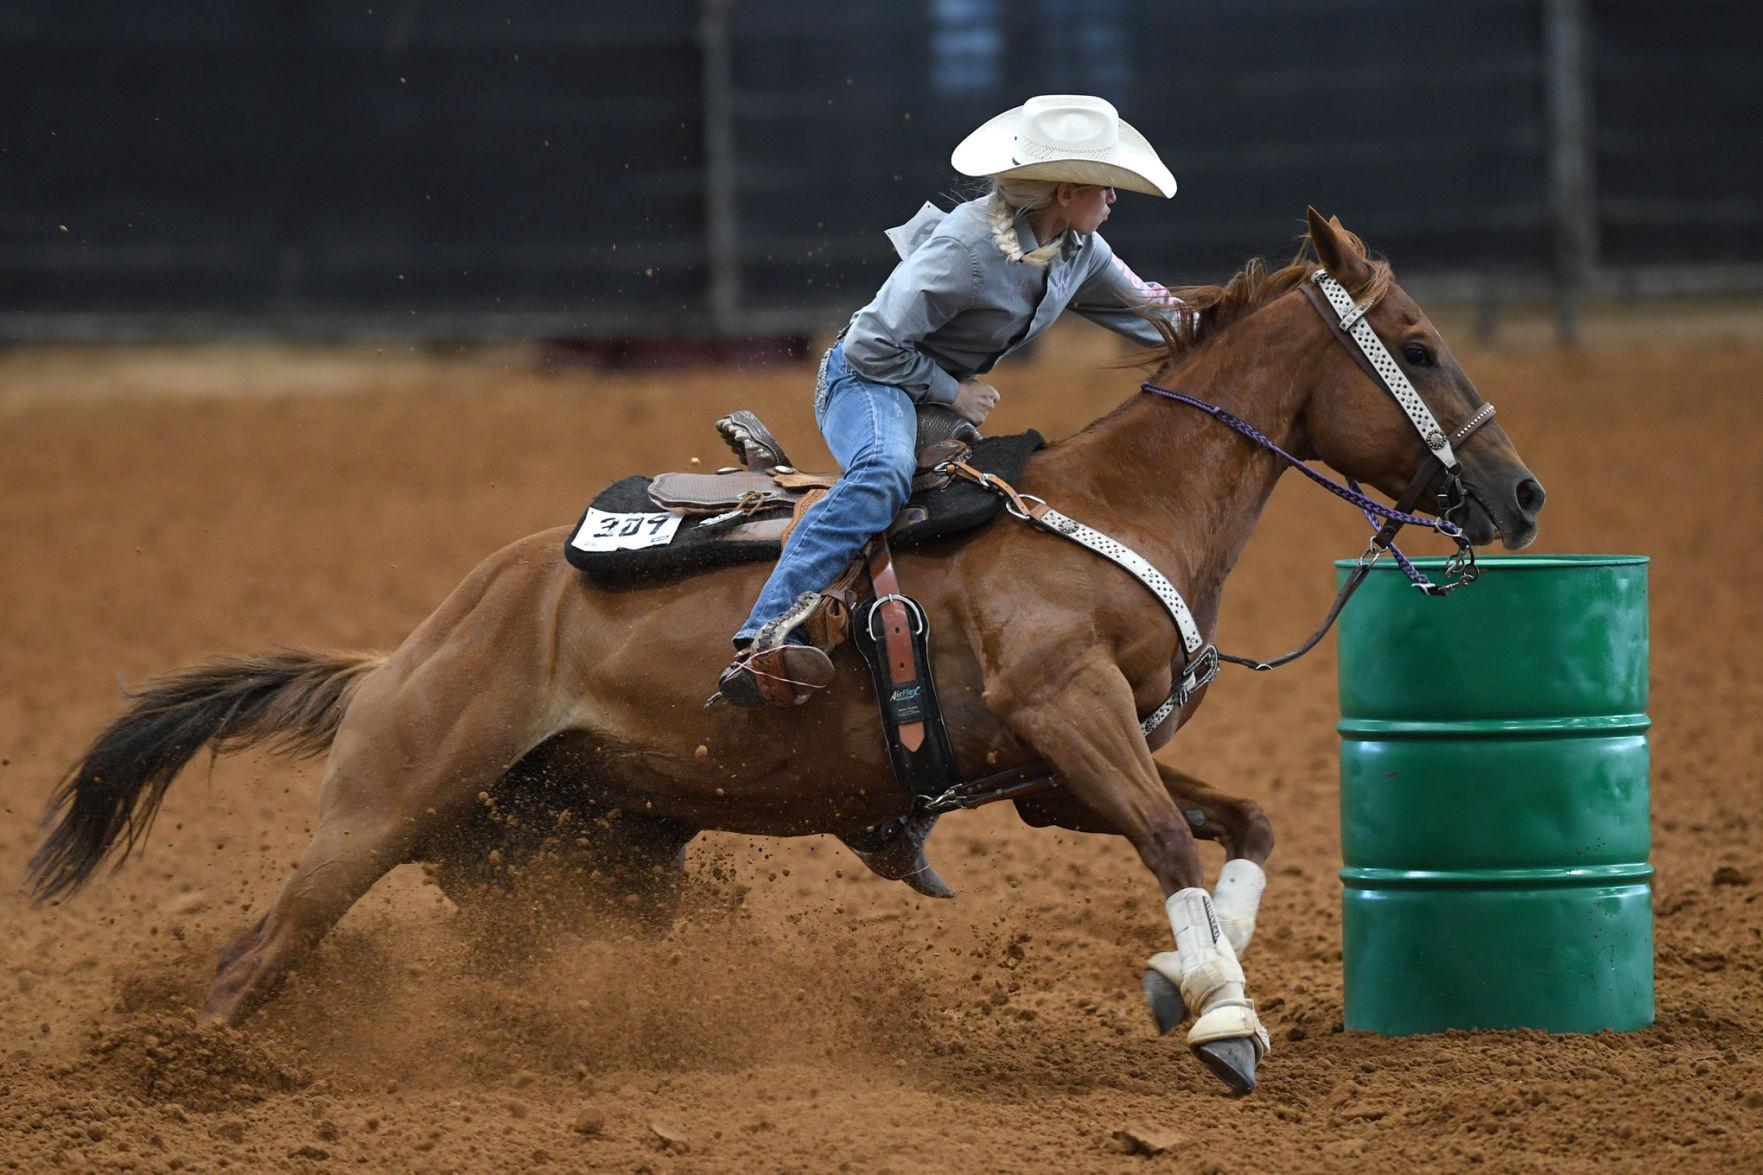 Gallery Barrel racing at the Texas State 4H Horse Show Gallery